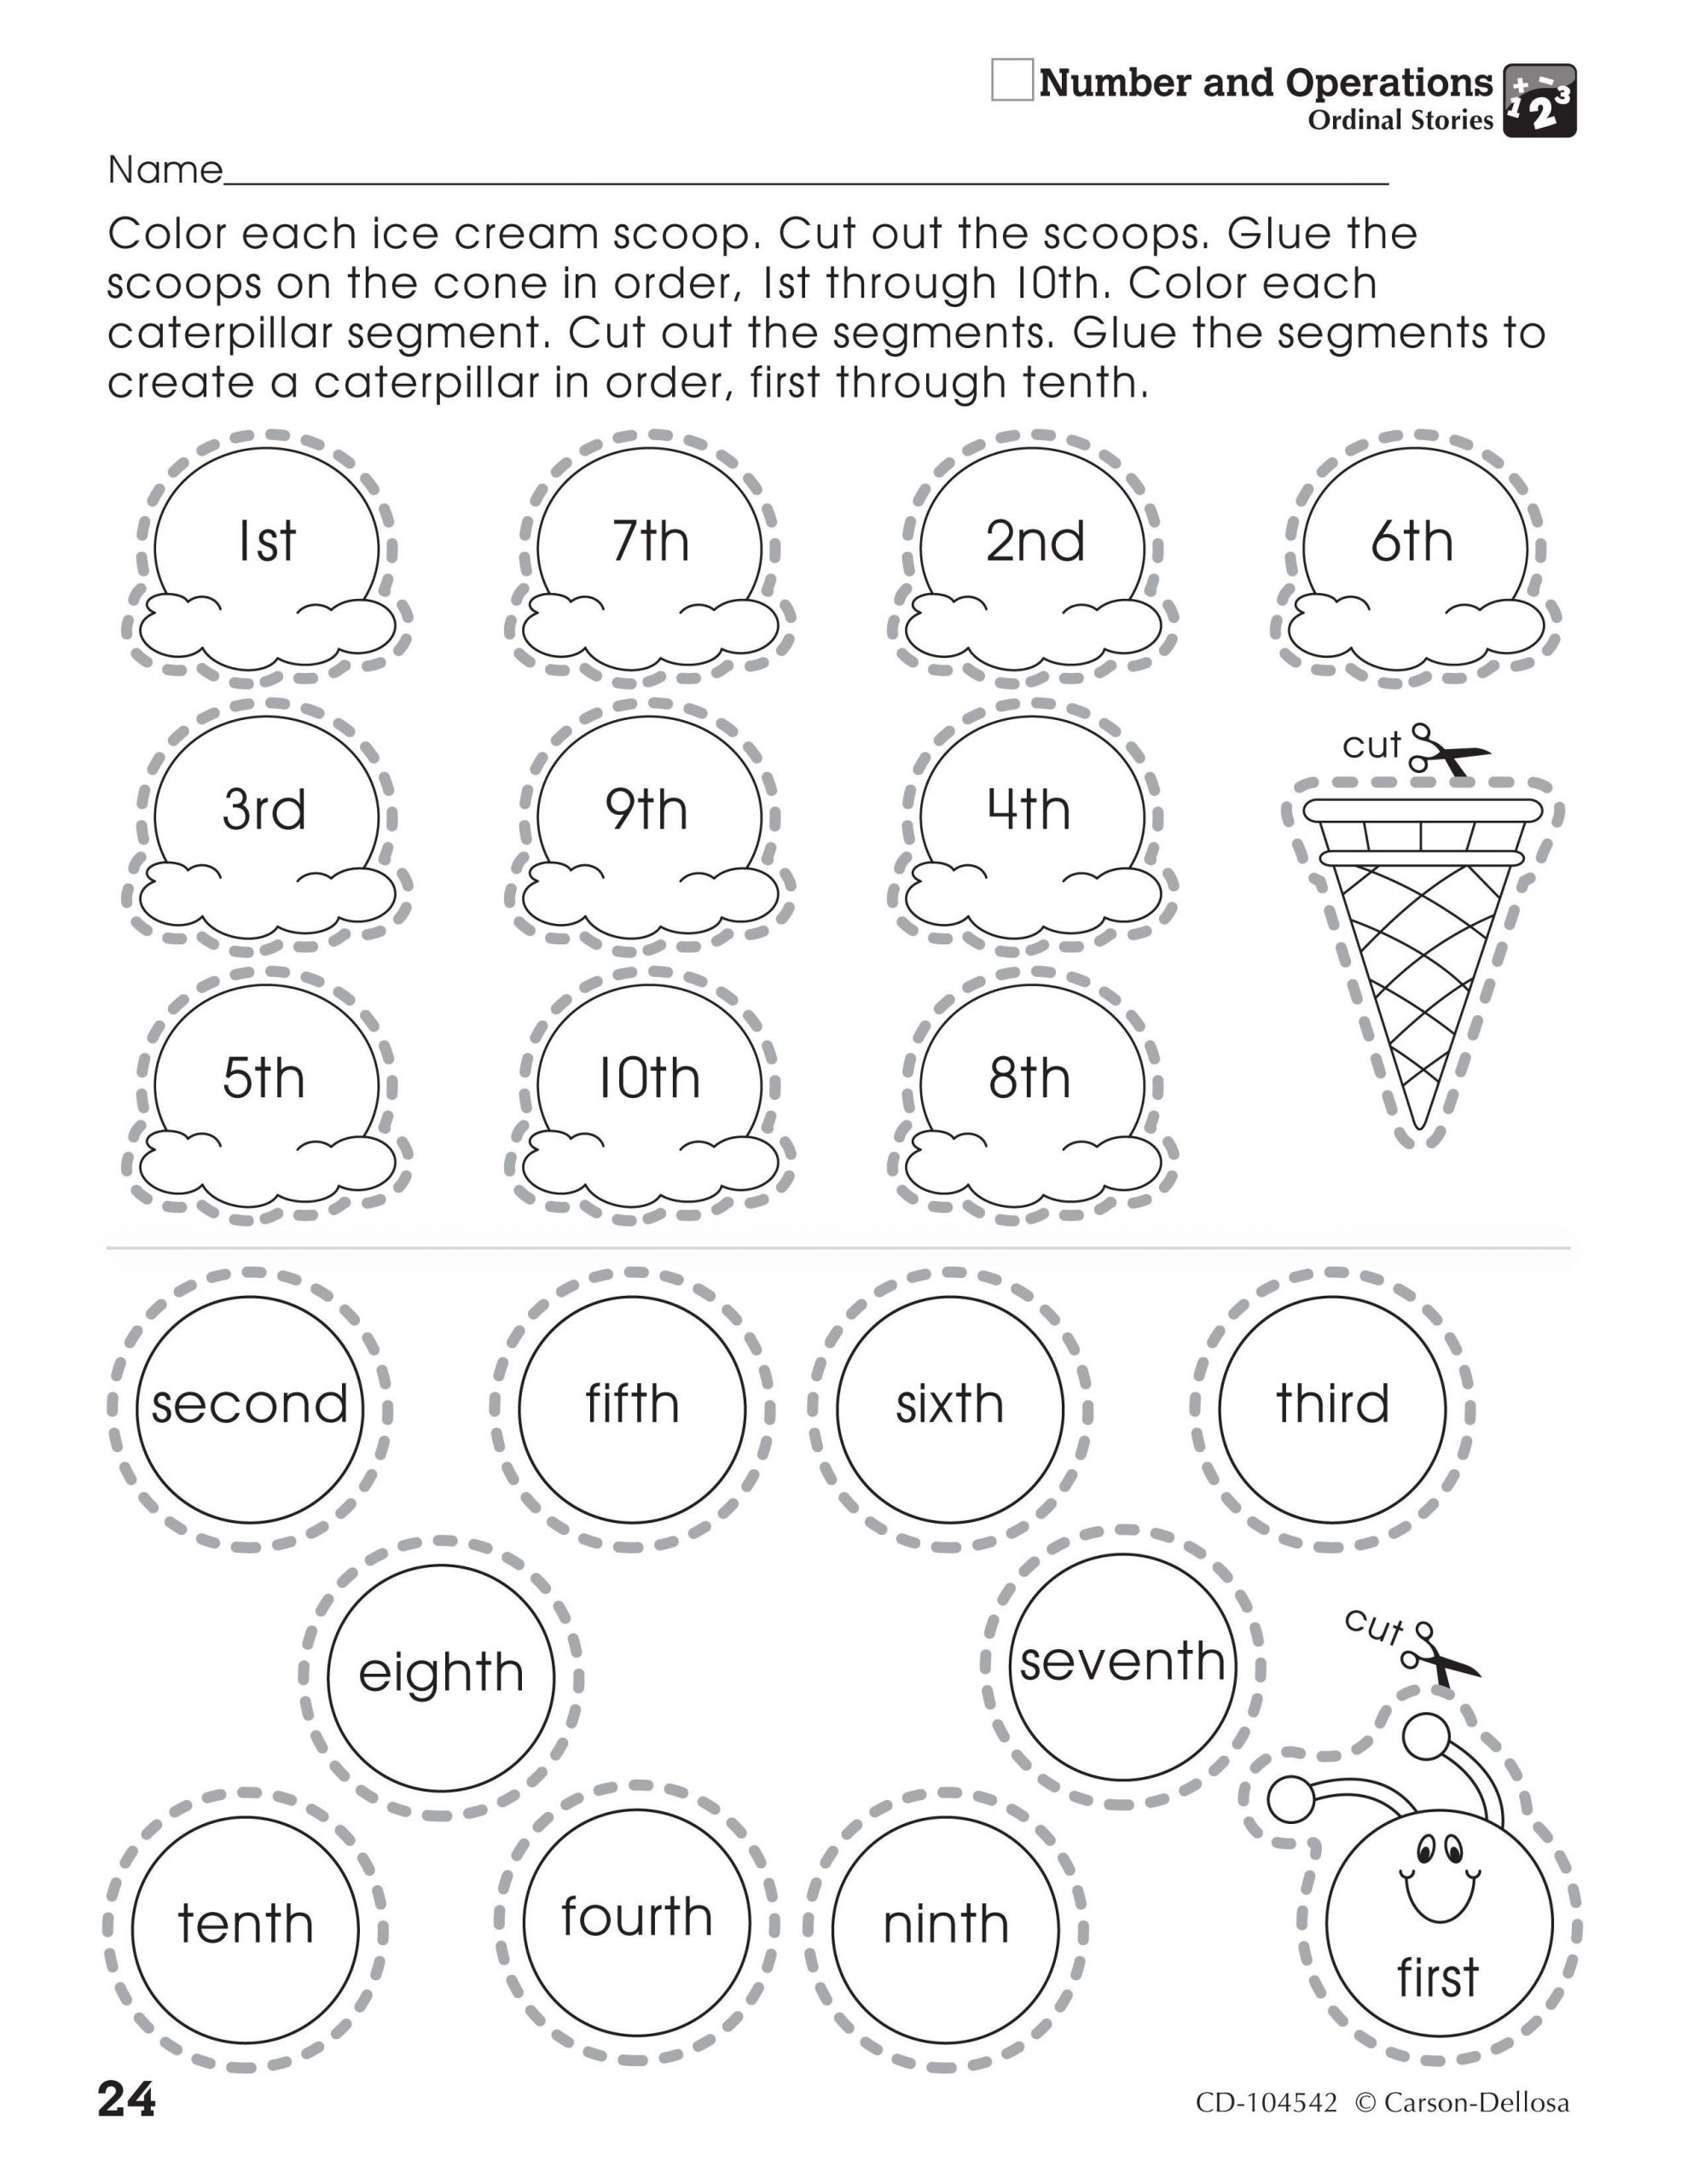 Free Math Worksheets Third Grade 3 Subtraction Subtract 3 Digit Numbers with Regrouping